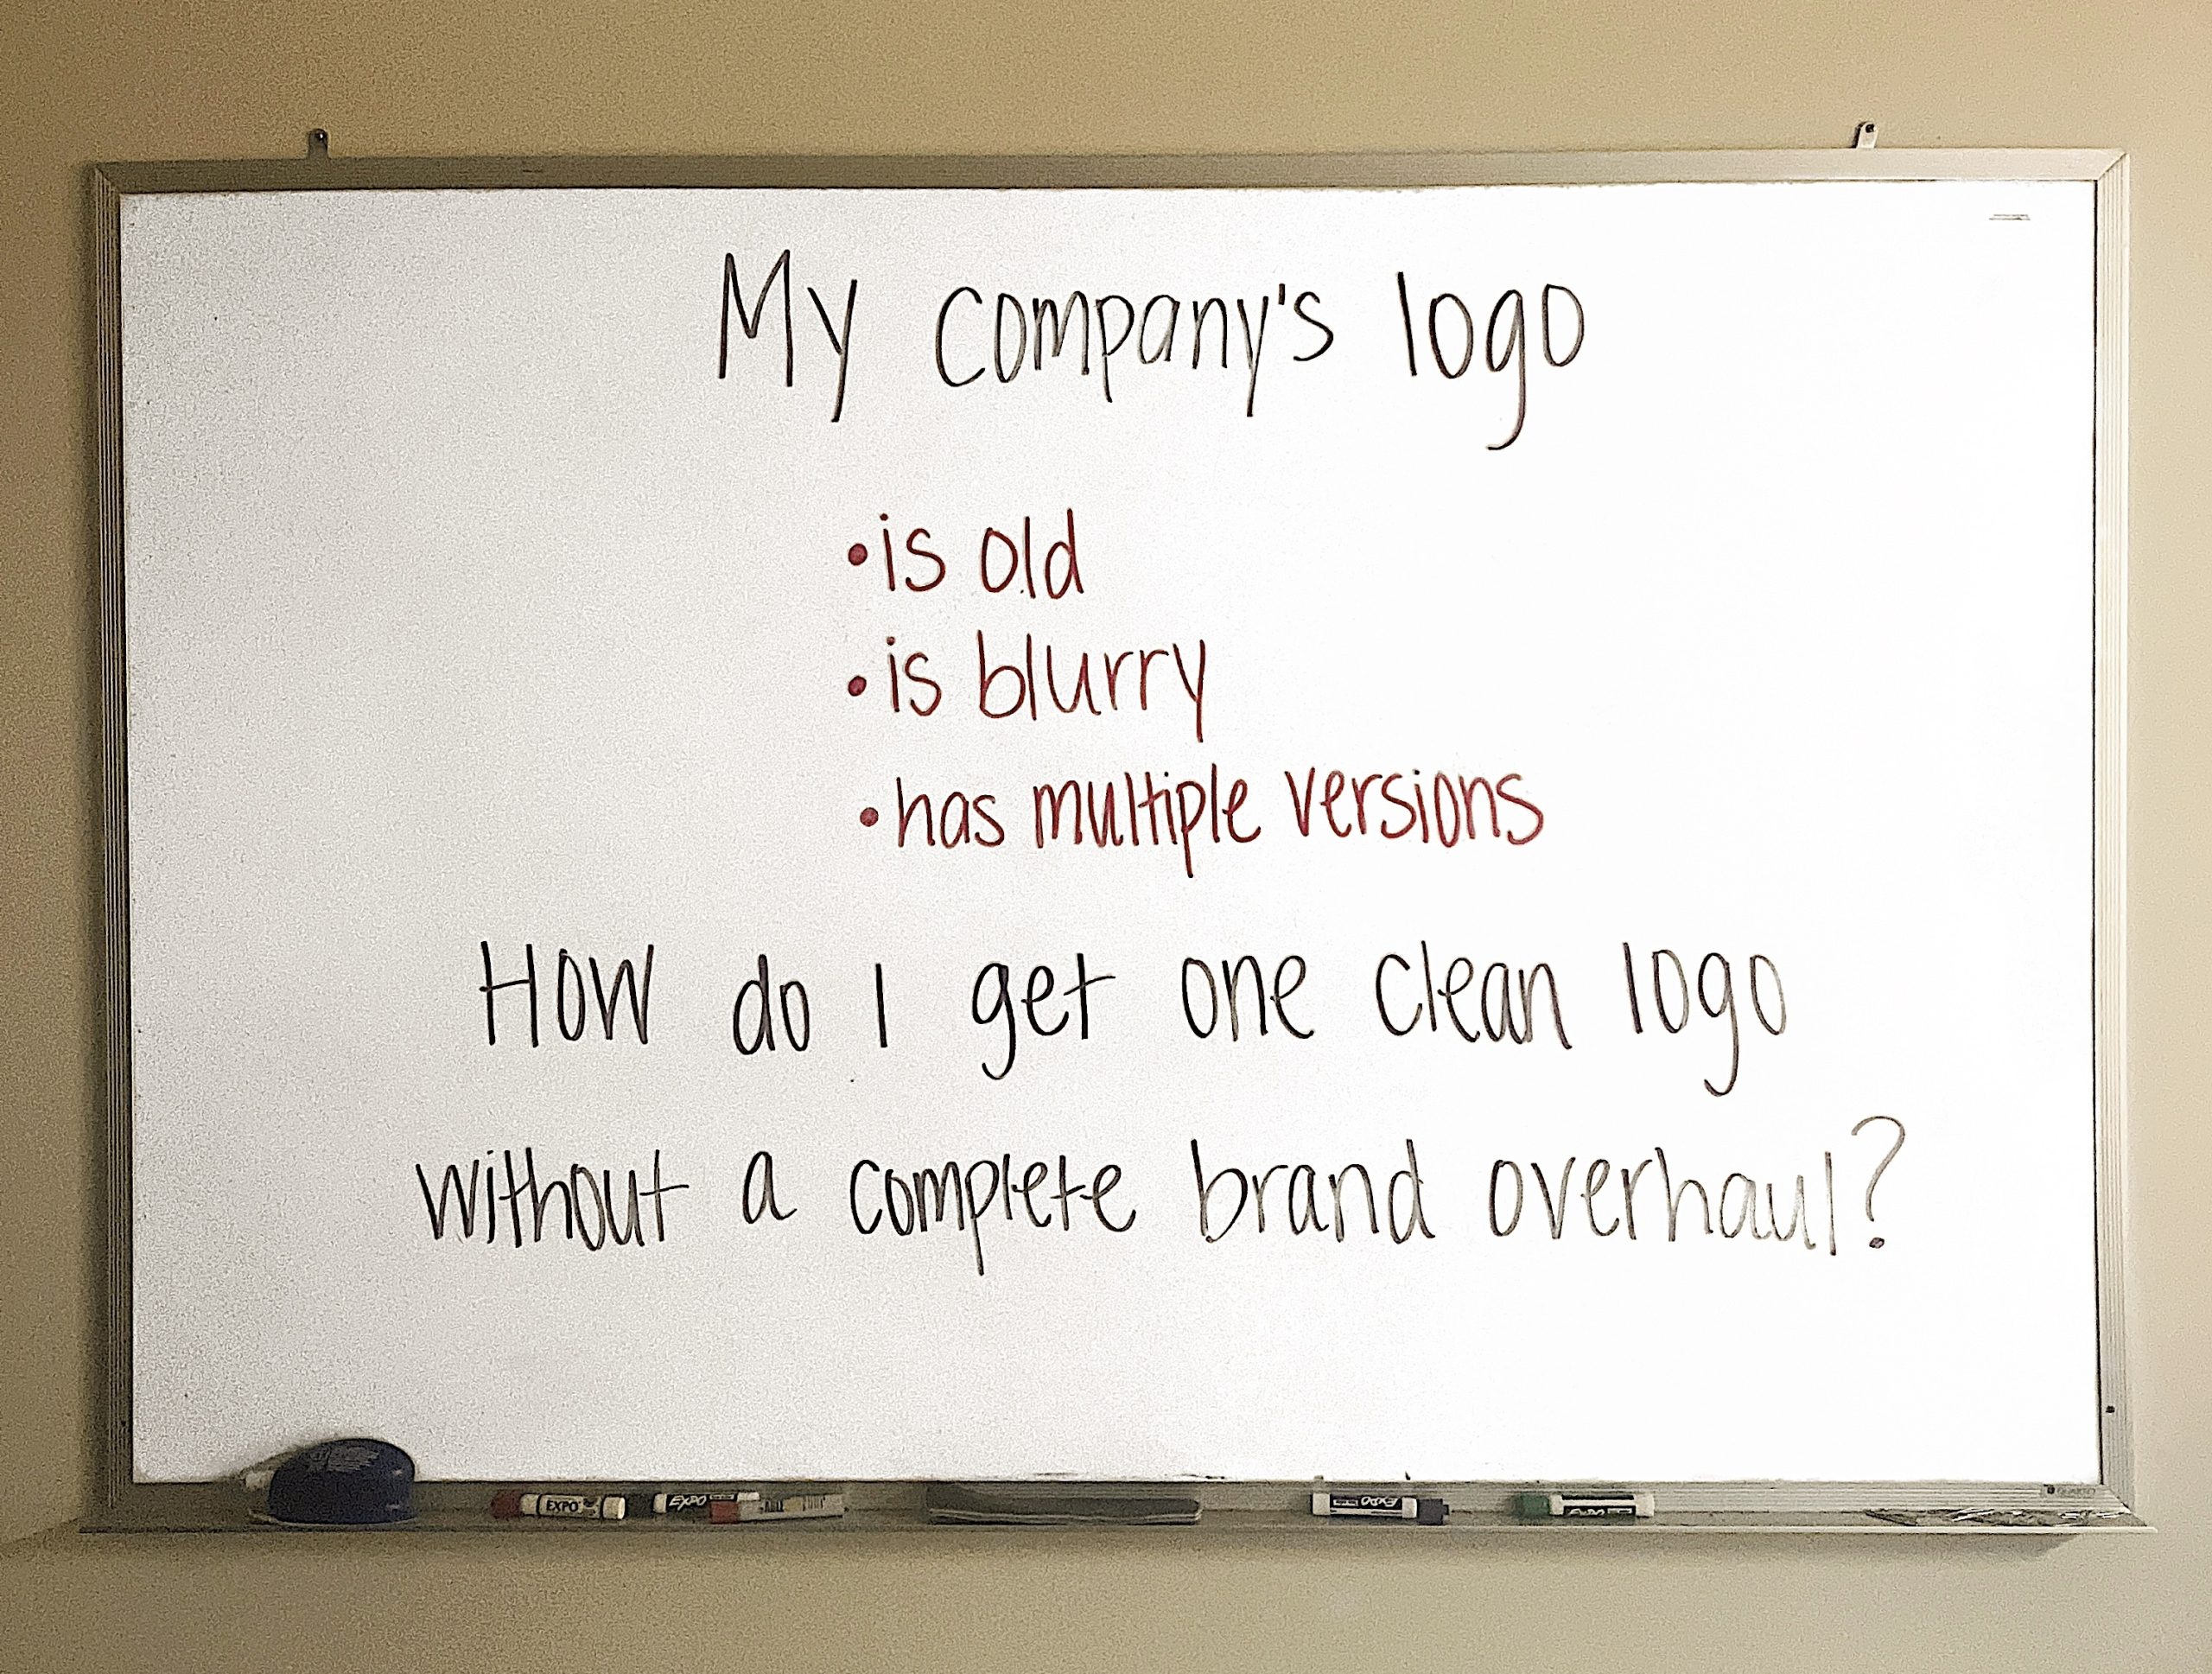 (White) Board Meeting: Refreshing Your Company Logo